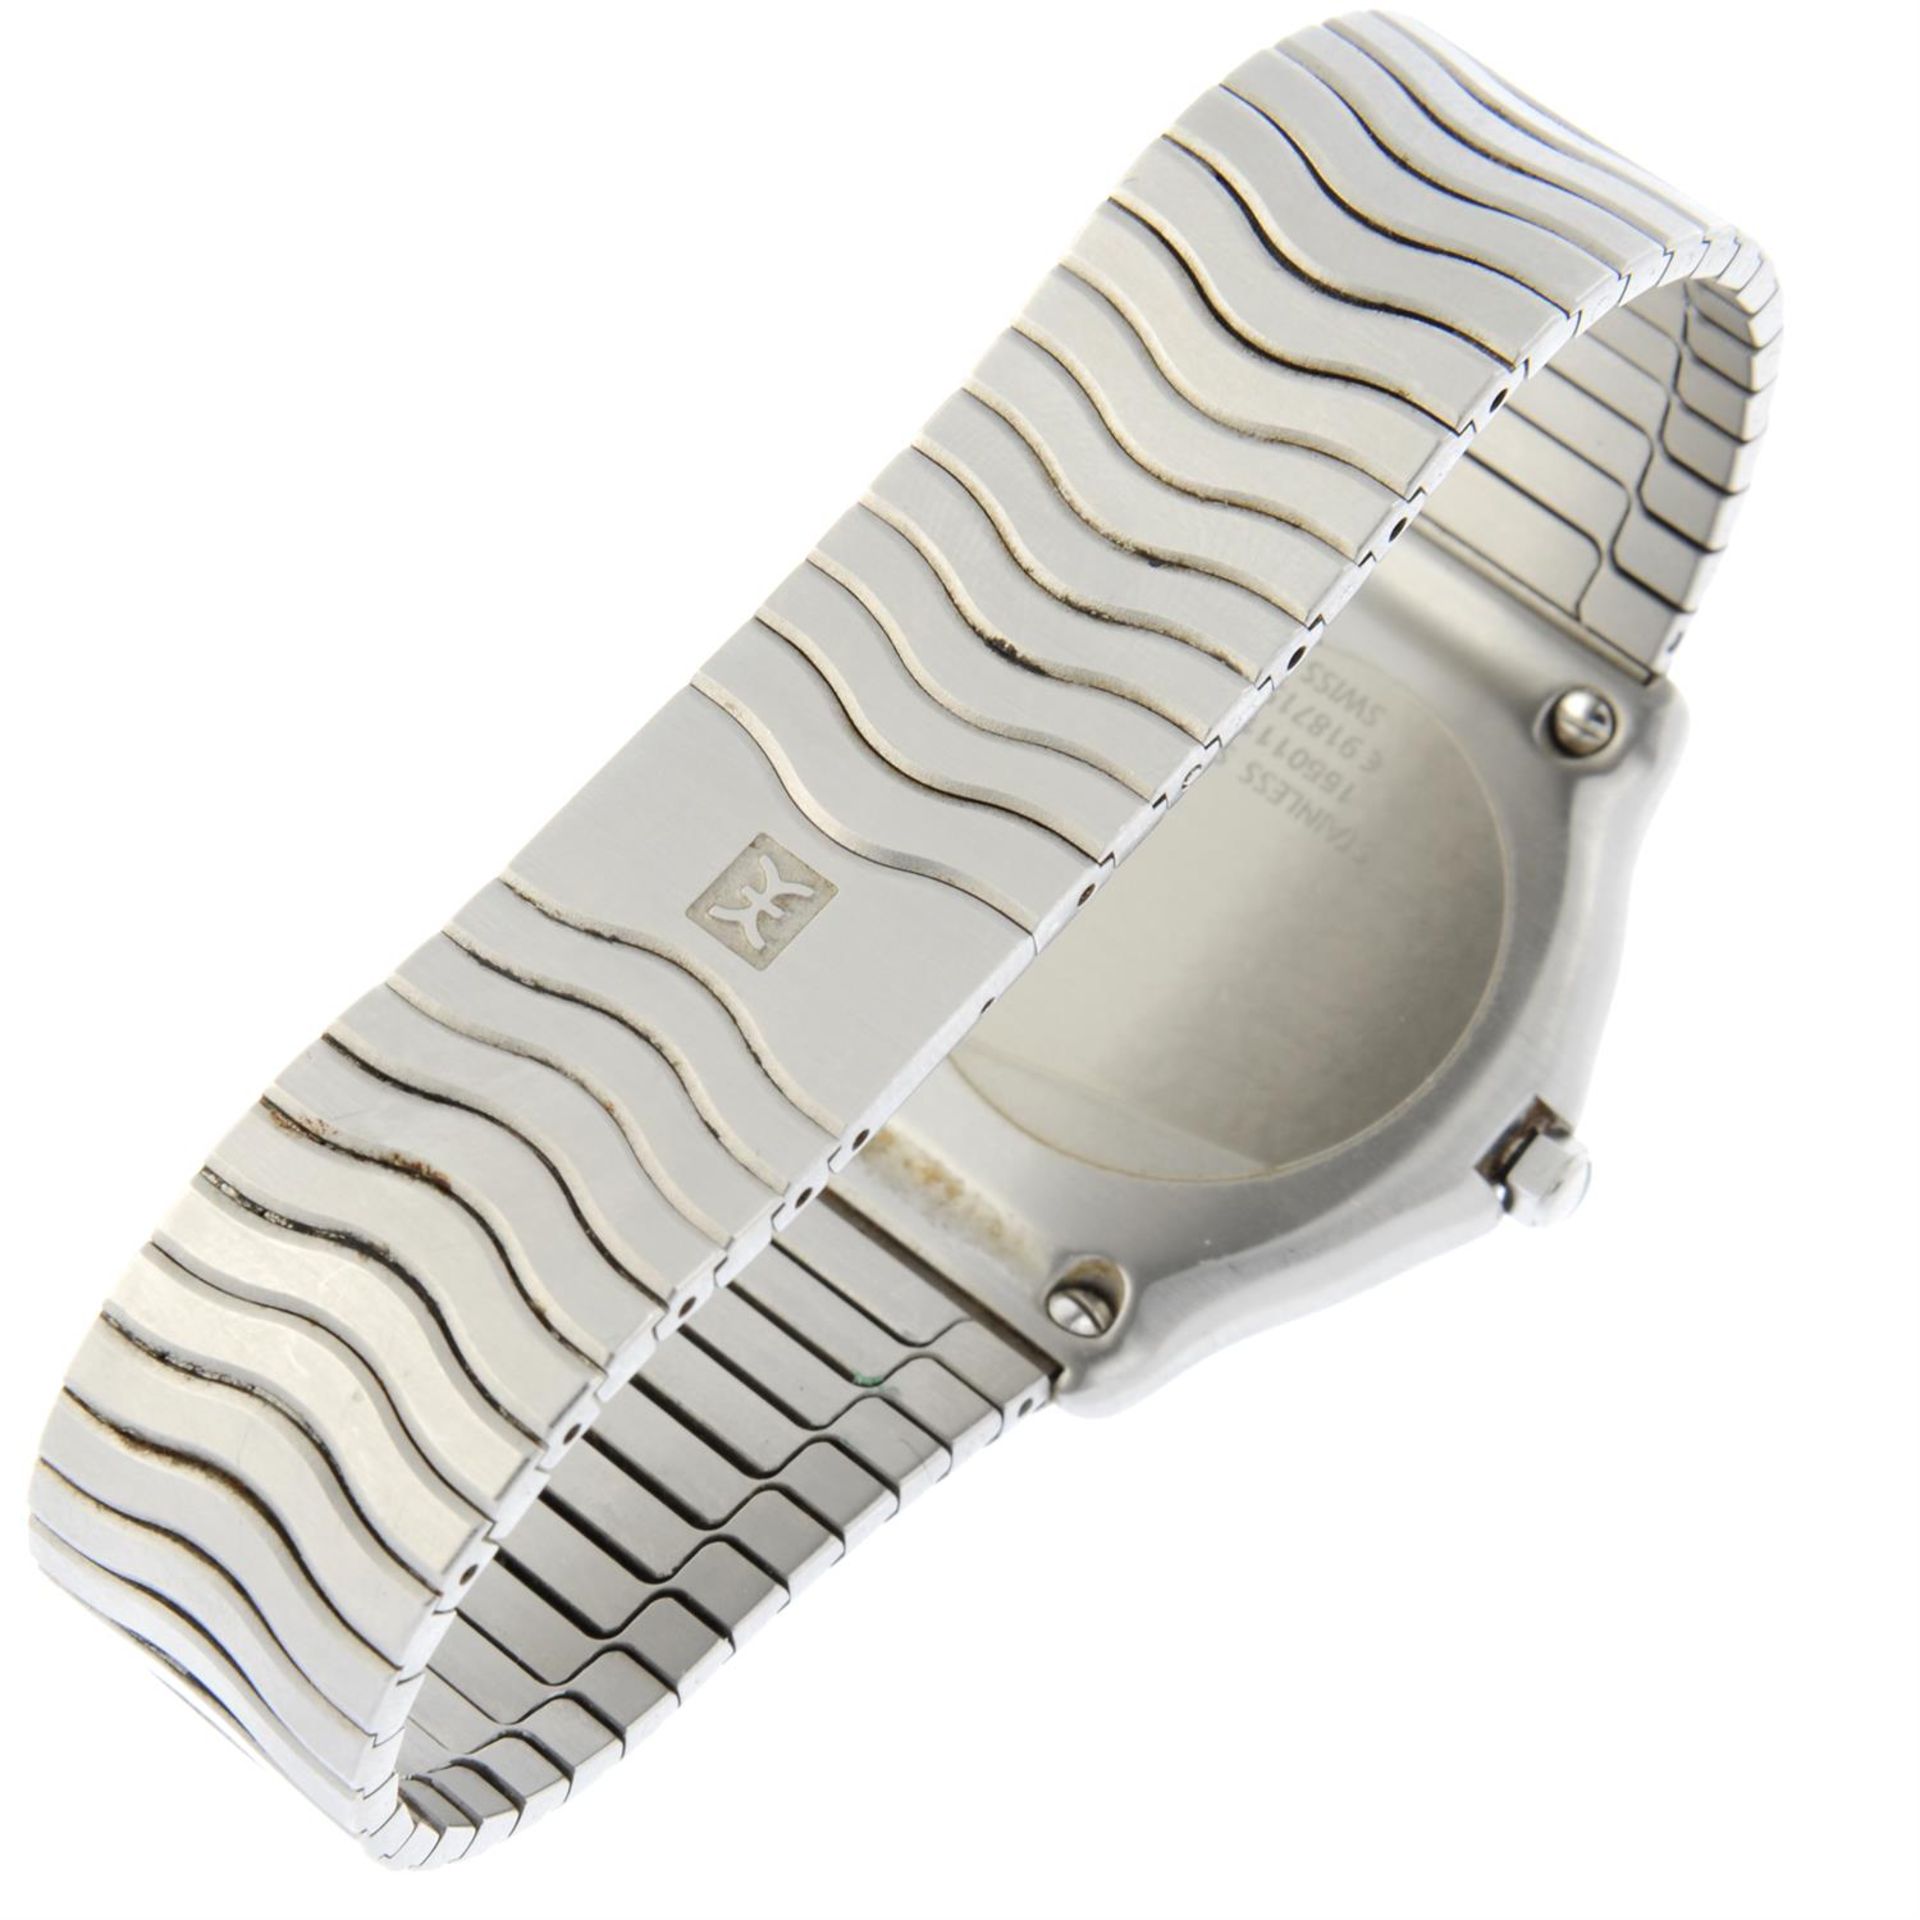 EBEL - a stainless steel Classic Wave bracelet watch - Image 2 of 4